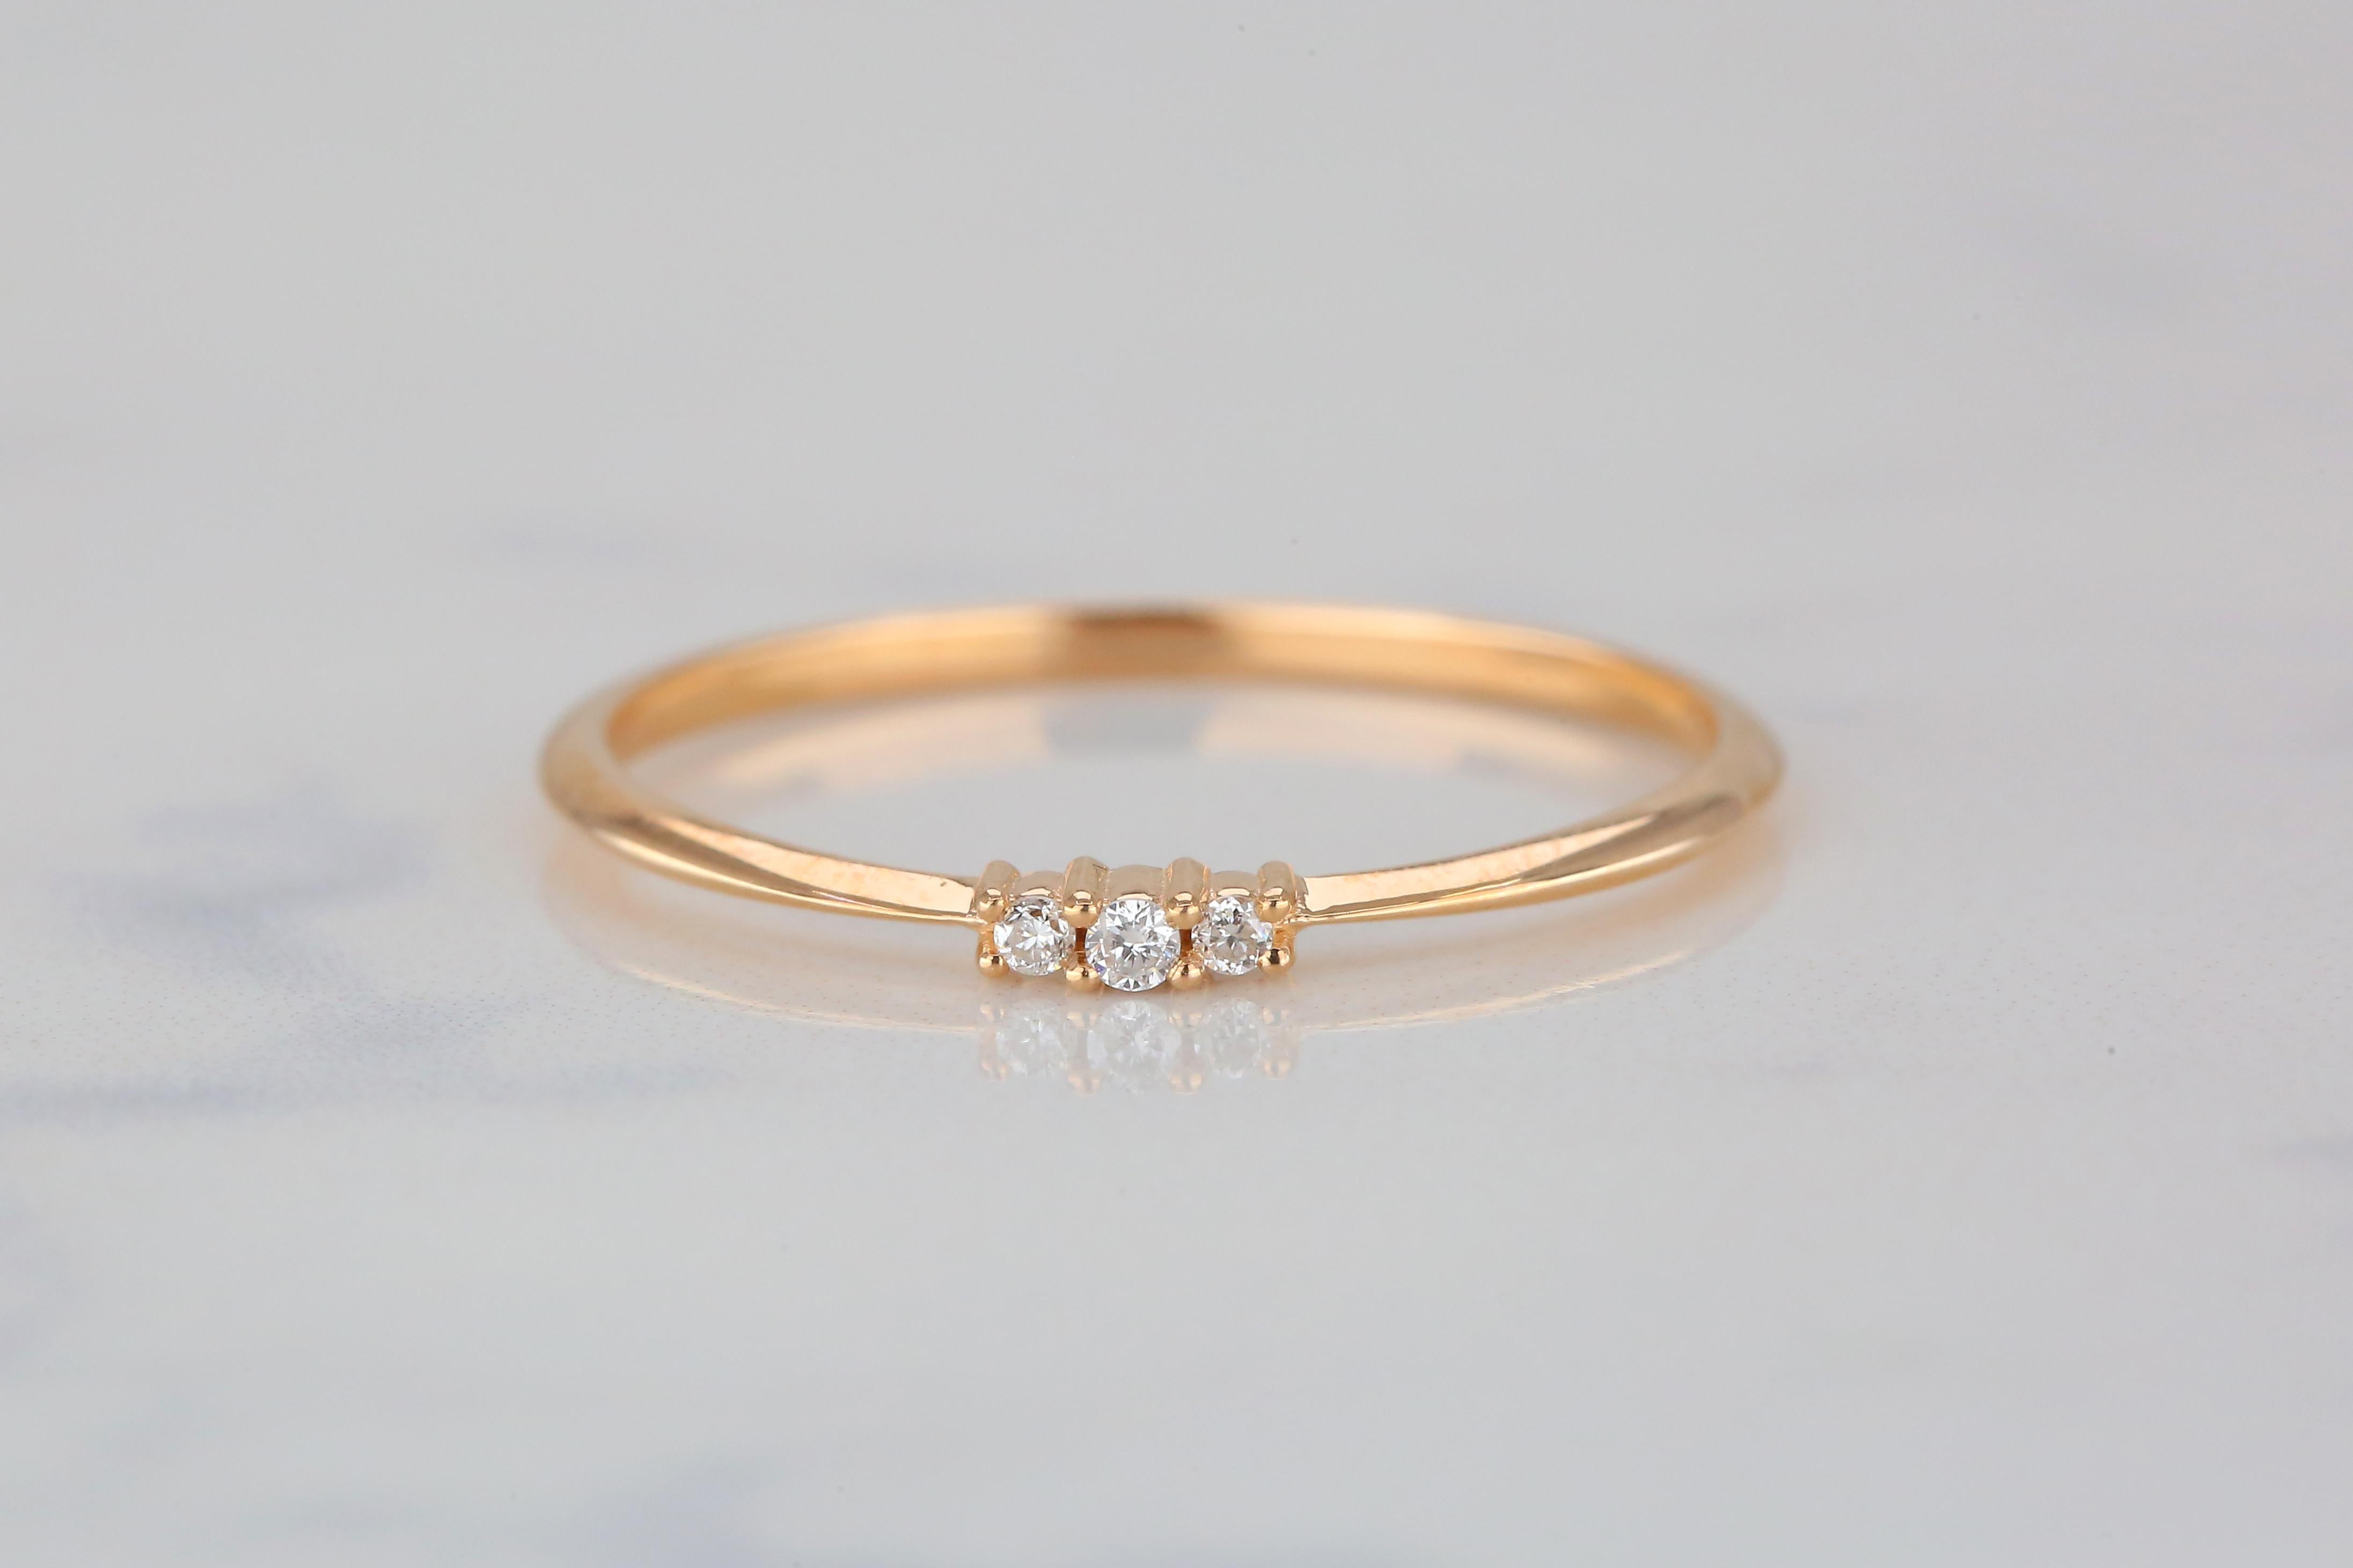 For Sale:  Round Diamond Trio Ring, 14k Solid Gold Ring, Dainty Ring, Minimalist Style Ring 5